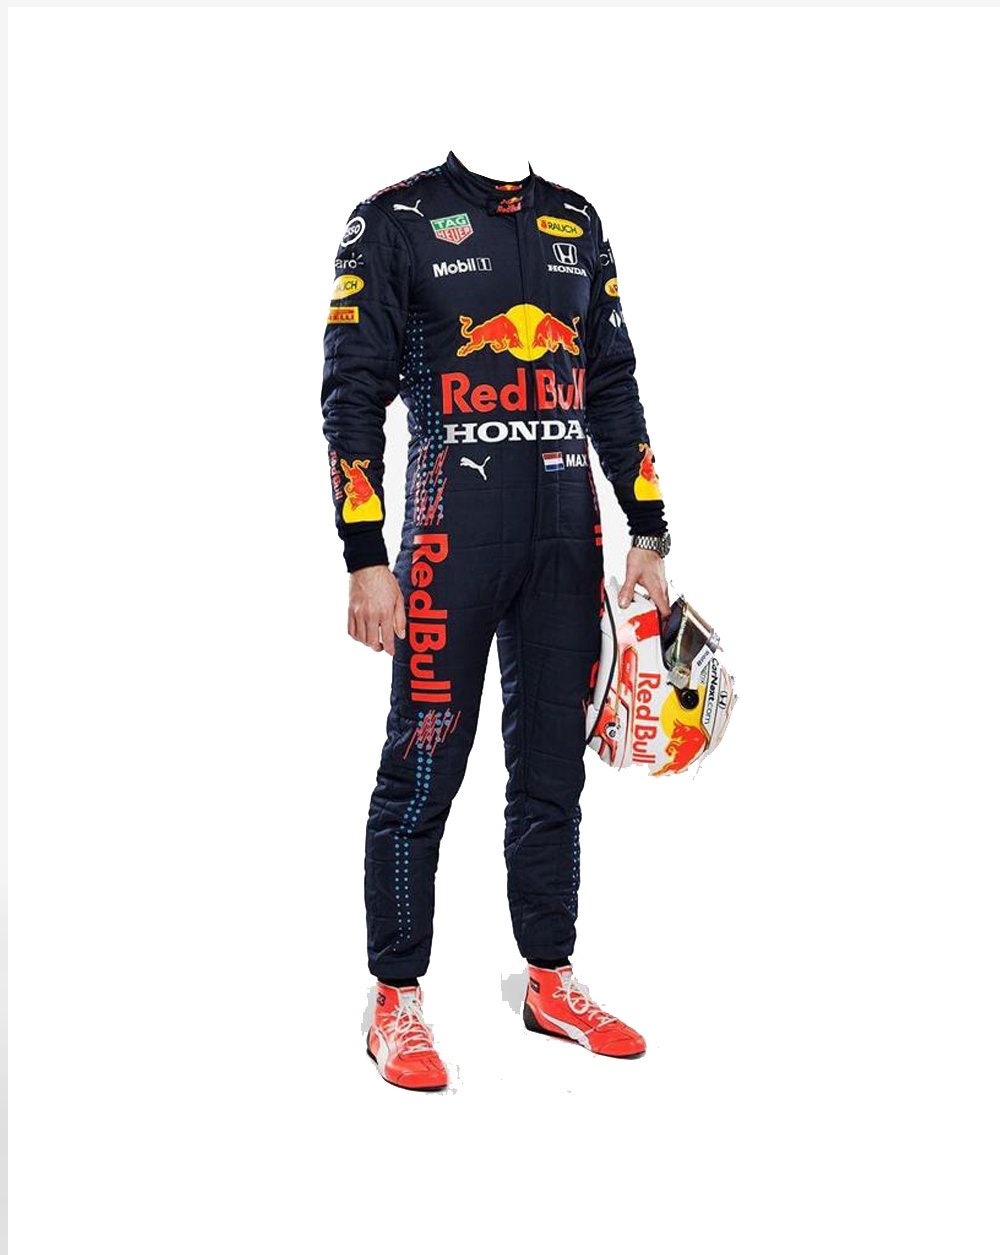 Go Karting Suits Red Bull Suit New 2021 Racing Suit Max - Etsy